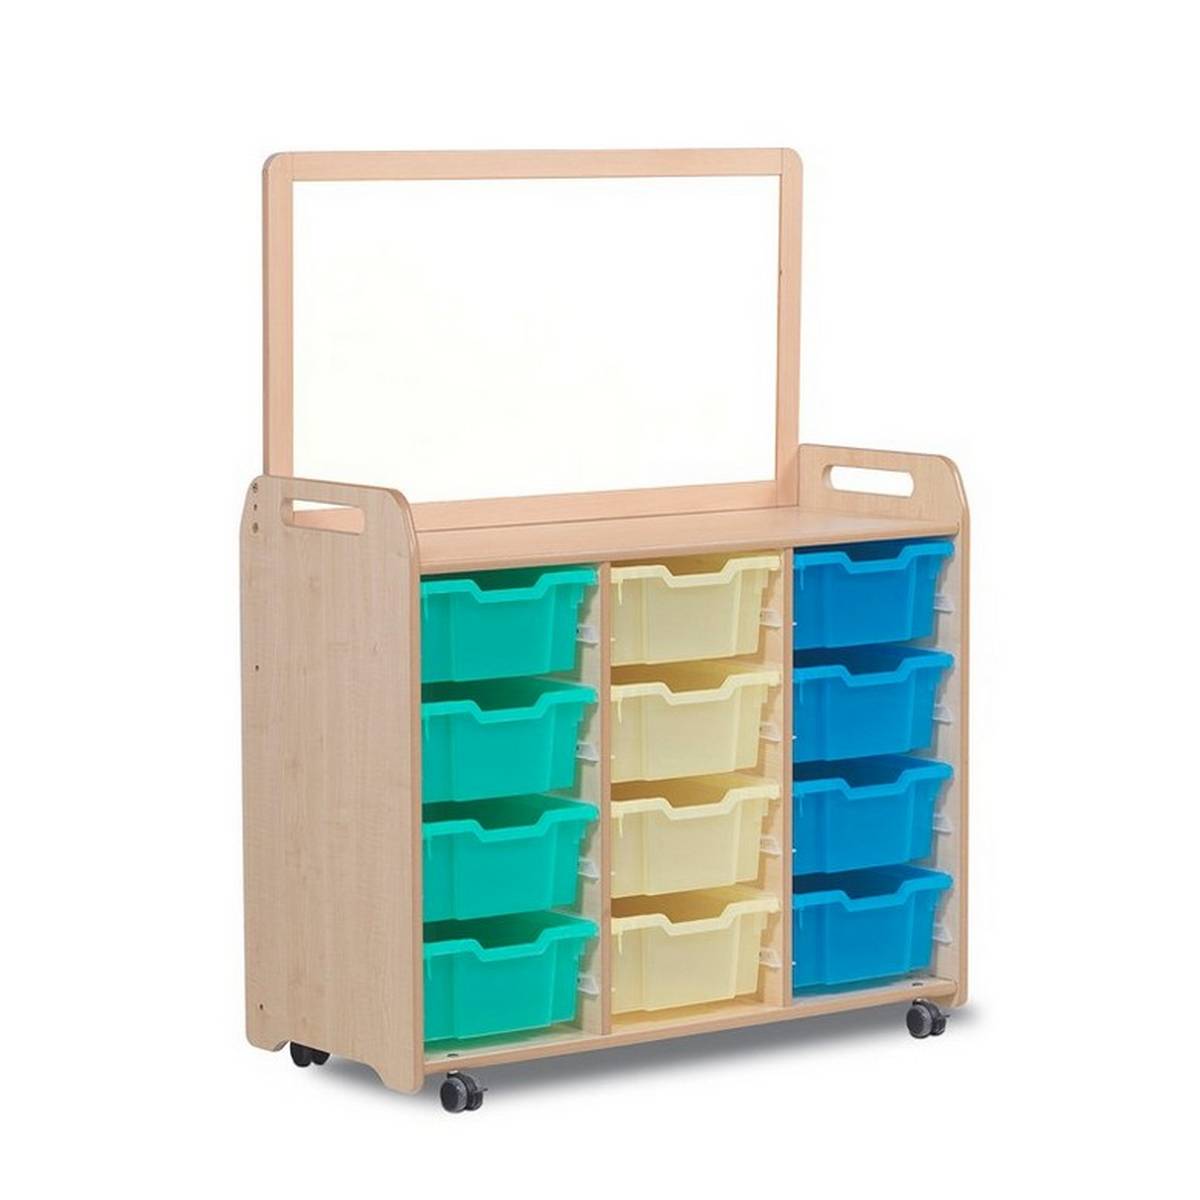 Triple column storage with magnetic top divider Dimensions: 1210(H) X 1045(W) X 465mm(D)